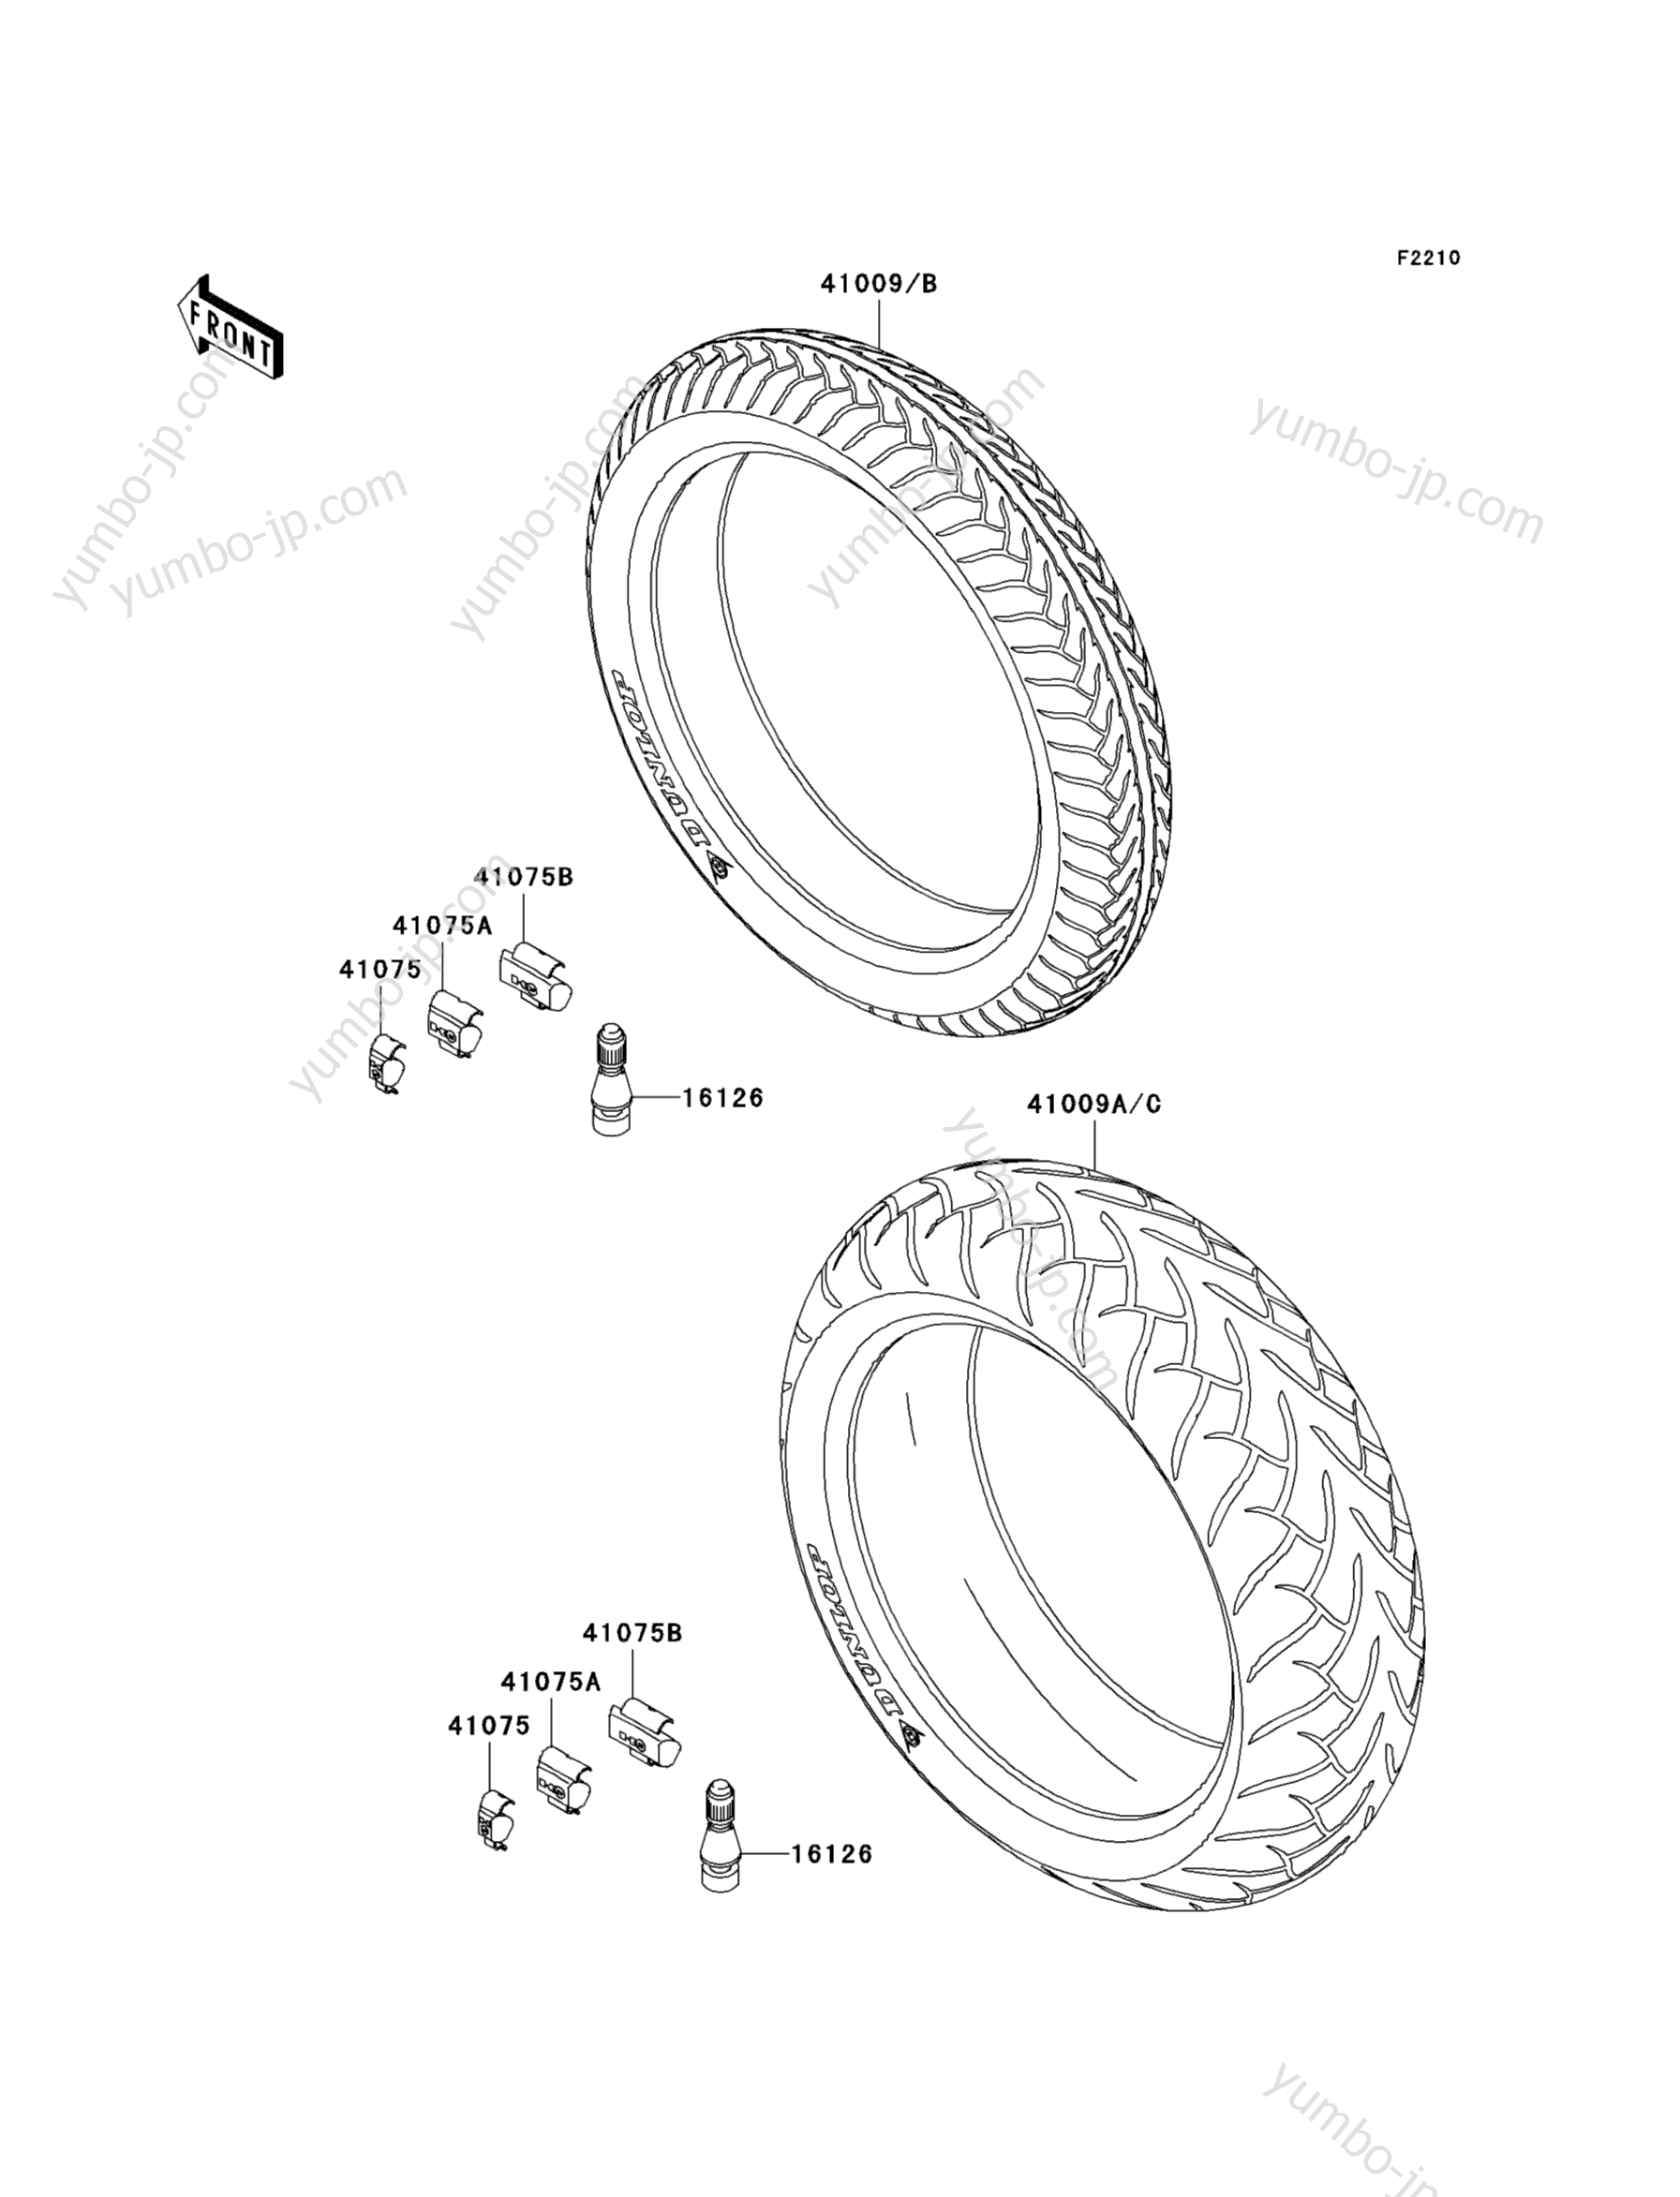 Tires for motorcycles KAWASAKI ZZR1200 (ZX1200-C2) 2003 year